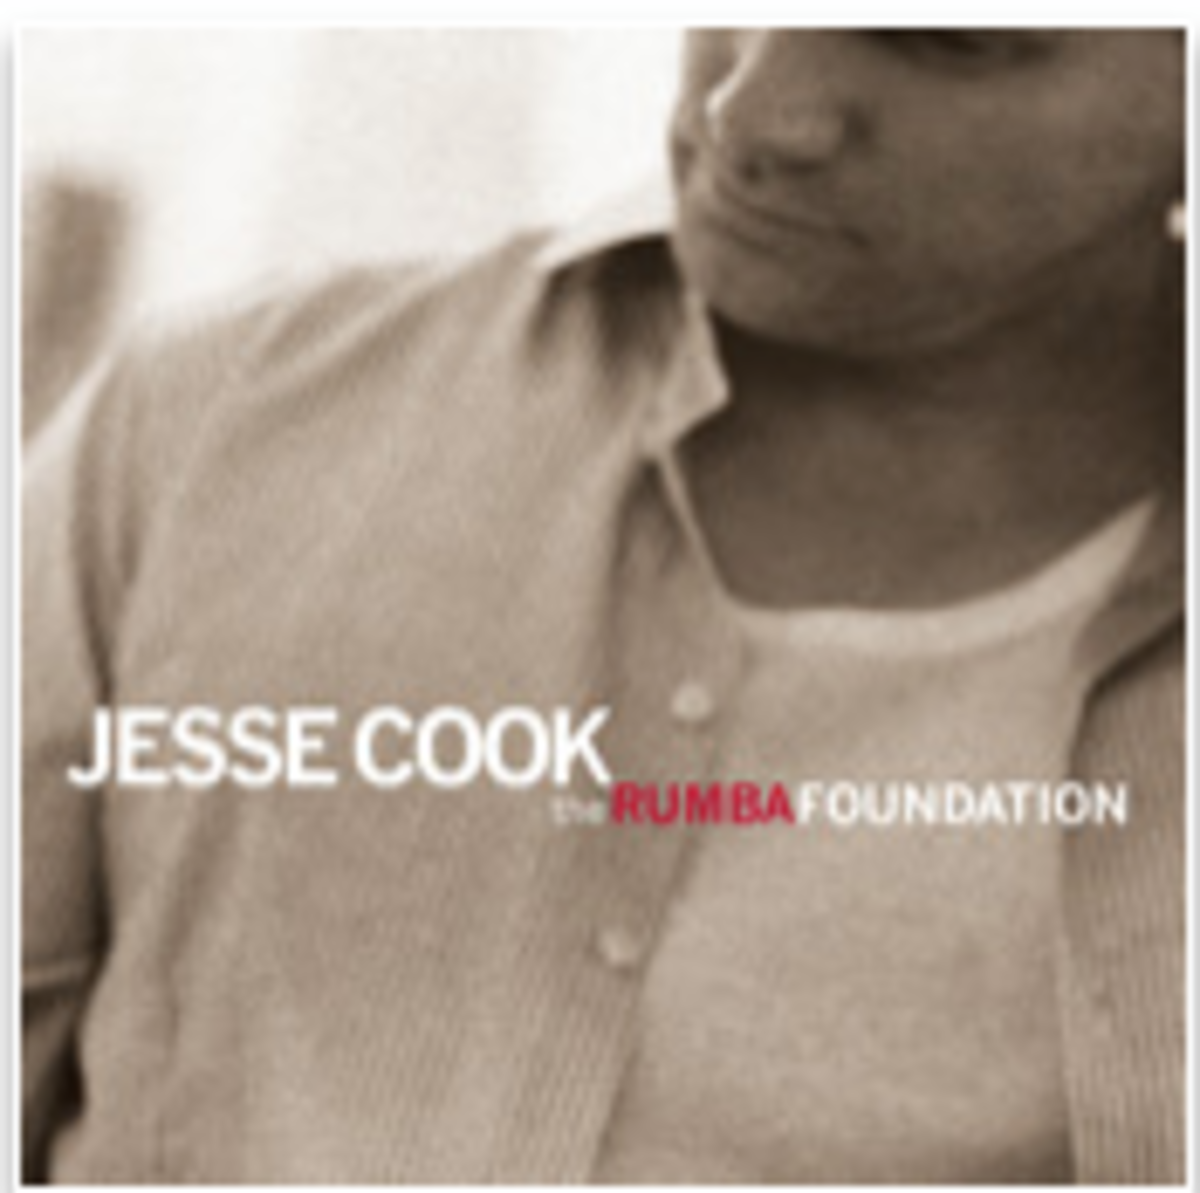 Jesse Cook, The Rumba Foundation